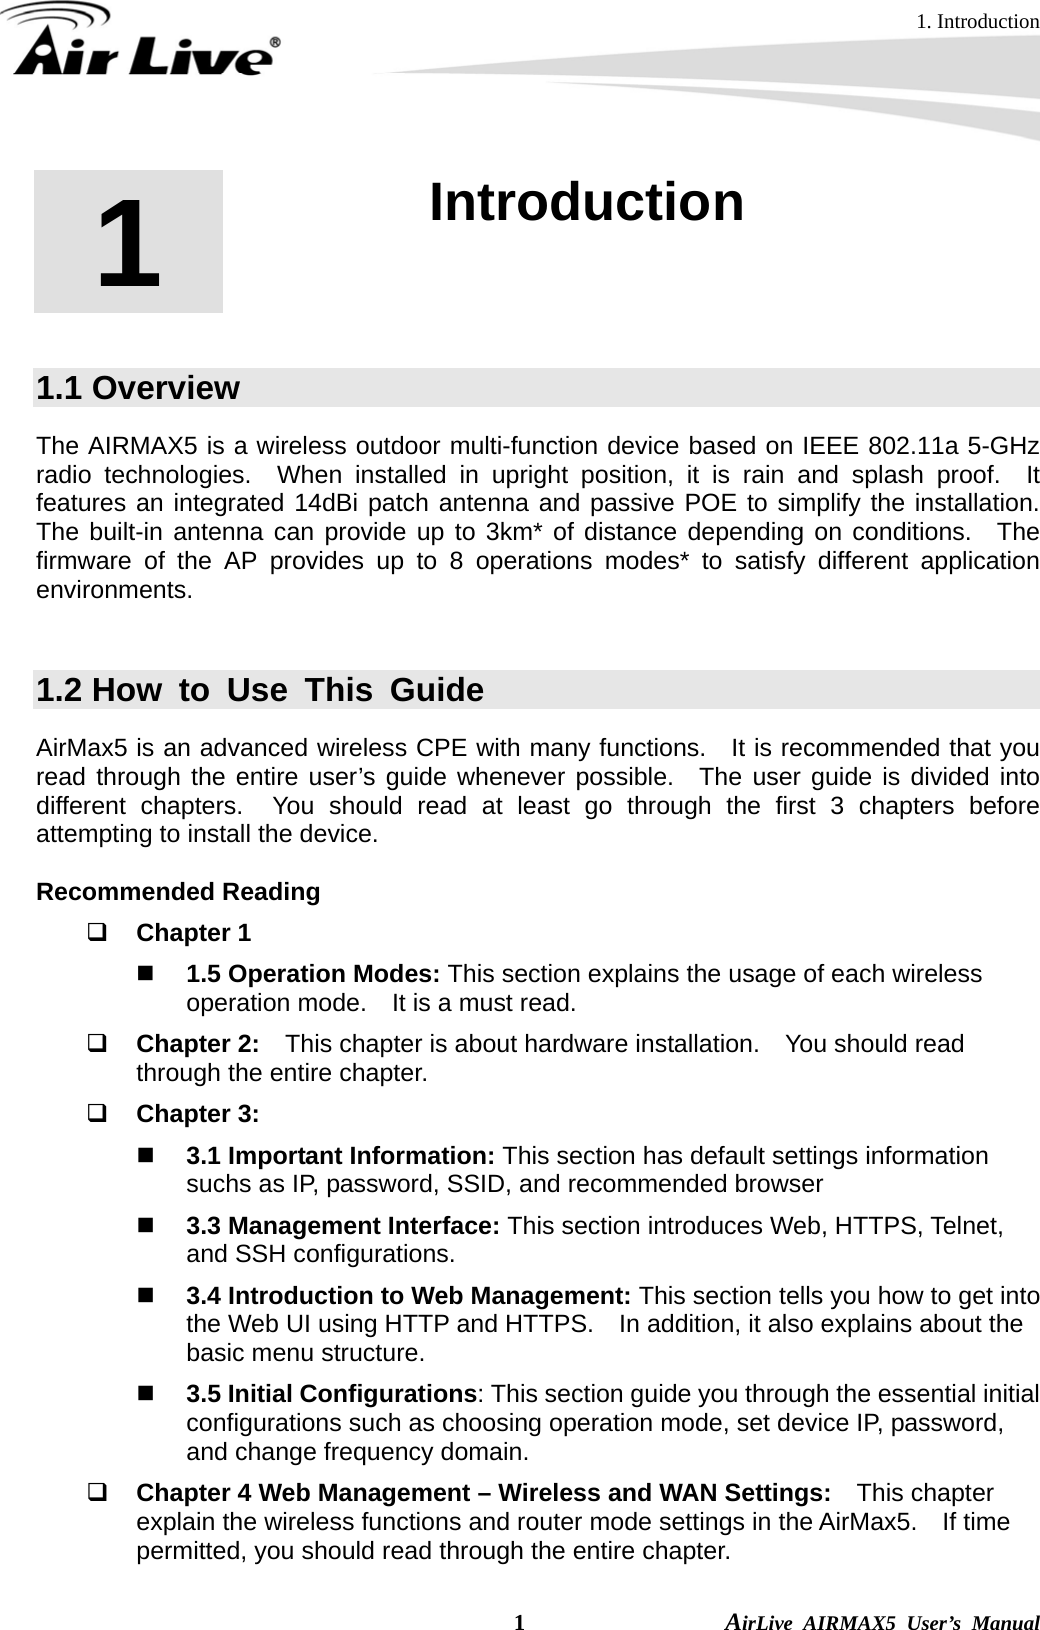 1. Introduction  1                AirLive AIRMAX5 User’s Manual 1  1. Introduction  1.1 Overview The AIRMAX5 is a wireless outdoor multi-function device based on IEEE 802.11a 5-GHz radio technologies.  When installed in upright position, it is rain and splash proof.  It features an integrated 14dBi patch antenna and passive POE to simplify the installation.  The built-in antenna can provide up to 3km* of distance depending on conditions.  The firmware of the AP provides up to 8 operations modes* to satisfy different application environments.    1.2 How to Use This Guide AirMax5 is an advanced wireless CPE with many functions.   It is recommended that you read through the entire user’s guide whenever possible.  The user guide is divided into different chapters.  You should read at least go through the first 3 chapters before attempting to install the device.  Recommended Reading  Chapter 1  1.5 Operation Modes: This section explains the usage of each wireless operation mode.    It is a must read.  Chapter 2:    This chapter is about hardware installation.    You should read through the entire chapter.  Chapter 3:      3.1 Important Information: This section has default settings information suchs as IP, password, SSID, and recommended browser  3.3 Management Interface: This section introduces Web, HTTPS, Telnet, and SSH configurations.  3.4 Introduction to Web Management: This section tells you how to get into the Web UI using HTTP and HTTPS.    In addition, it also explains about the basic menu structure.  3.5 Initial Configurations: This section guide you through the essential initial configurations such as choosing operation mode, set device IP, password, and change frequency domain.  Chapter 4 Web Management – Wireless and WAN Settings:   This chapter explain the wireless functions and router mode settings in the AirMax5.  If time permitted, you should read through the entire chapter. 